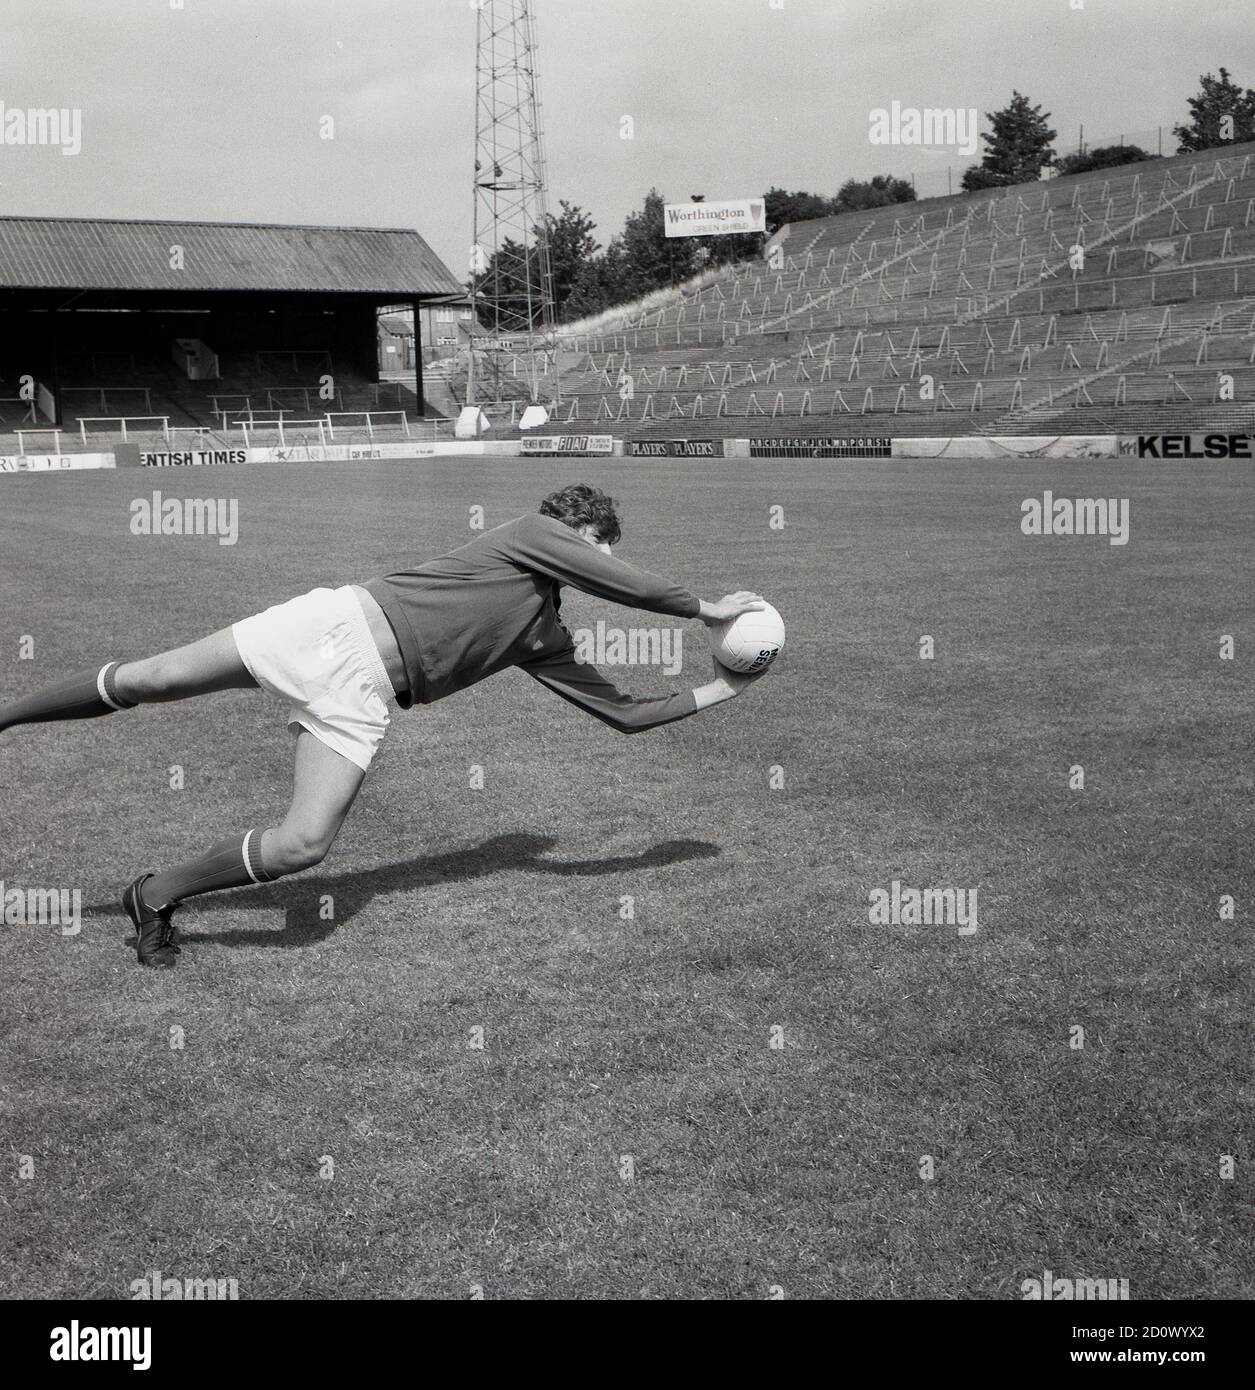 1960s, historical, goalkeeper with ball in hands, Charlton Athletic Footall Club, pre-season training, Southeast London, England, UK. In this era, football was played at grounds with traditional terraces as can be seen here. At the Valley as it was known, the banking the terraces was large and quite steep. Stock Photo